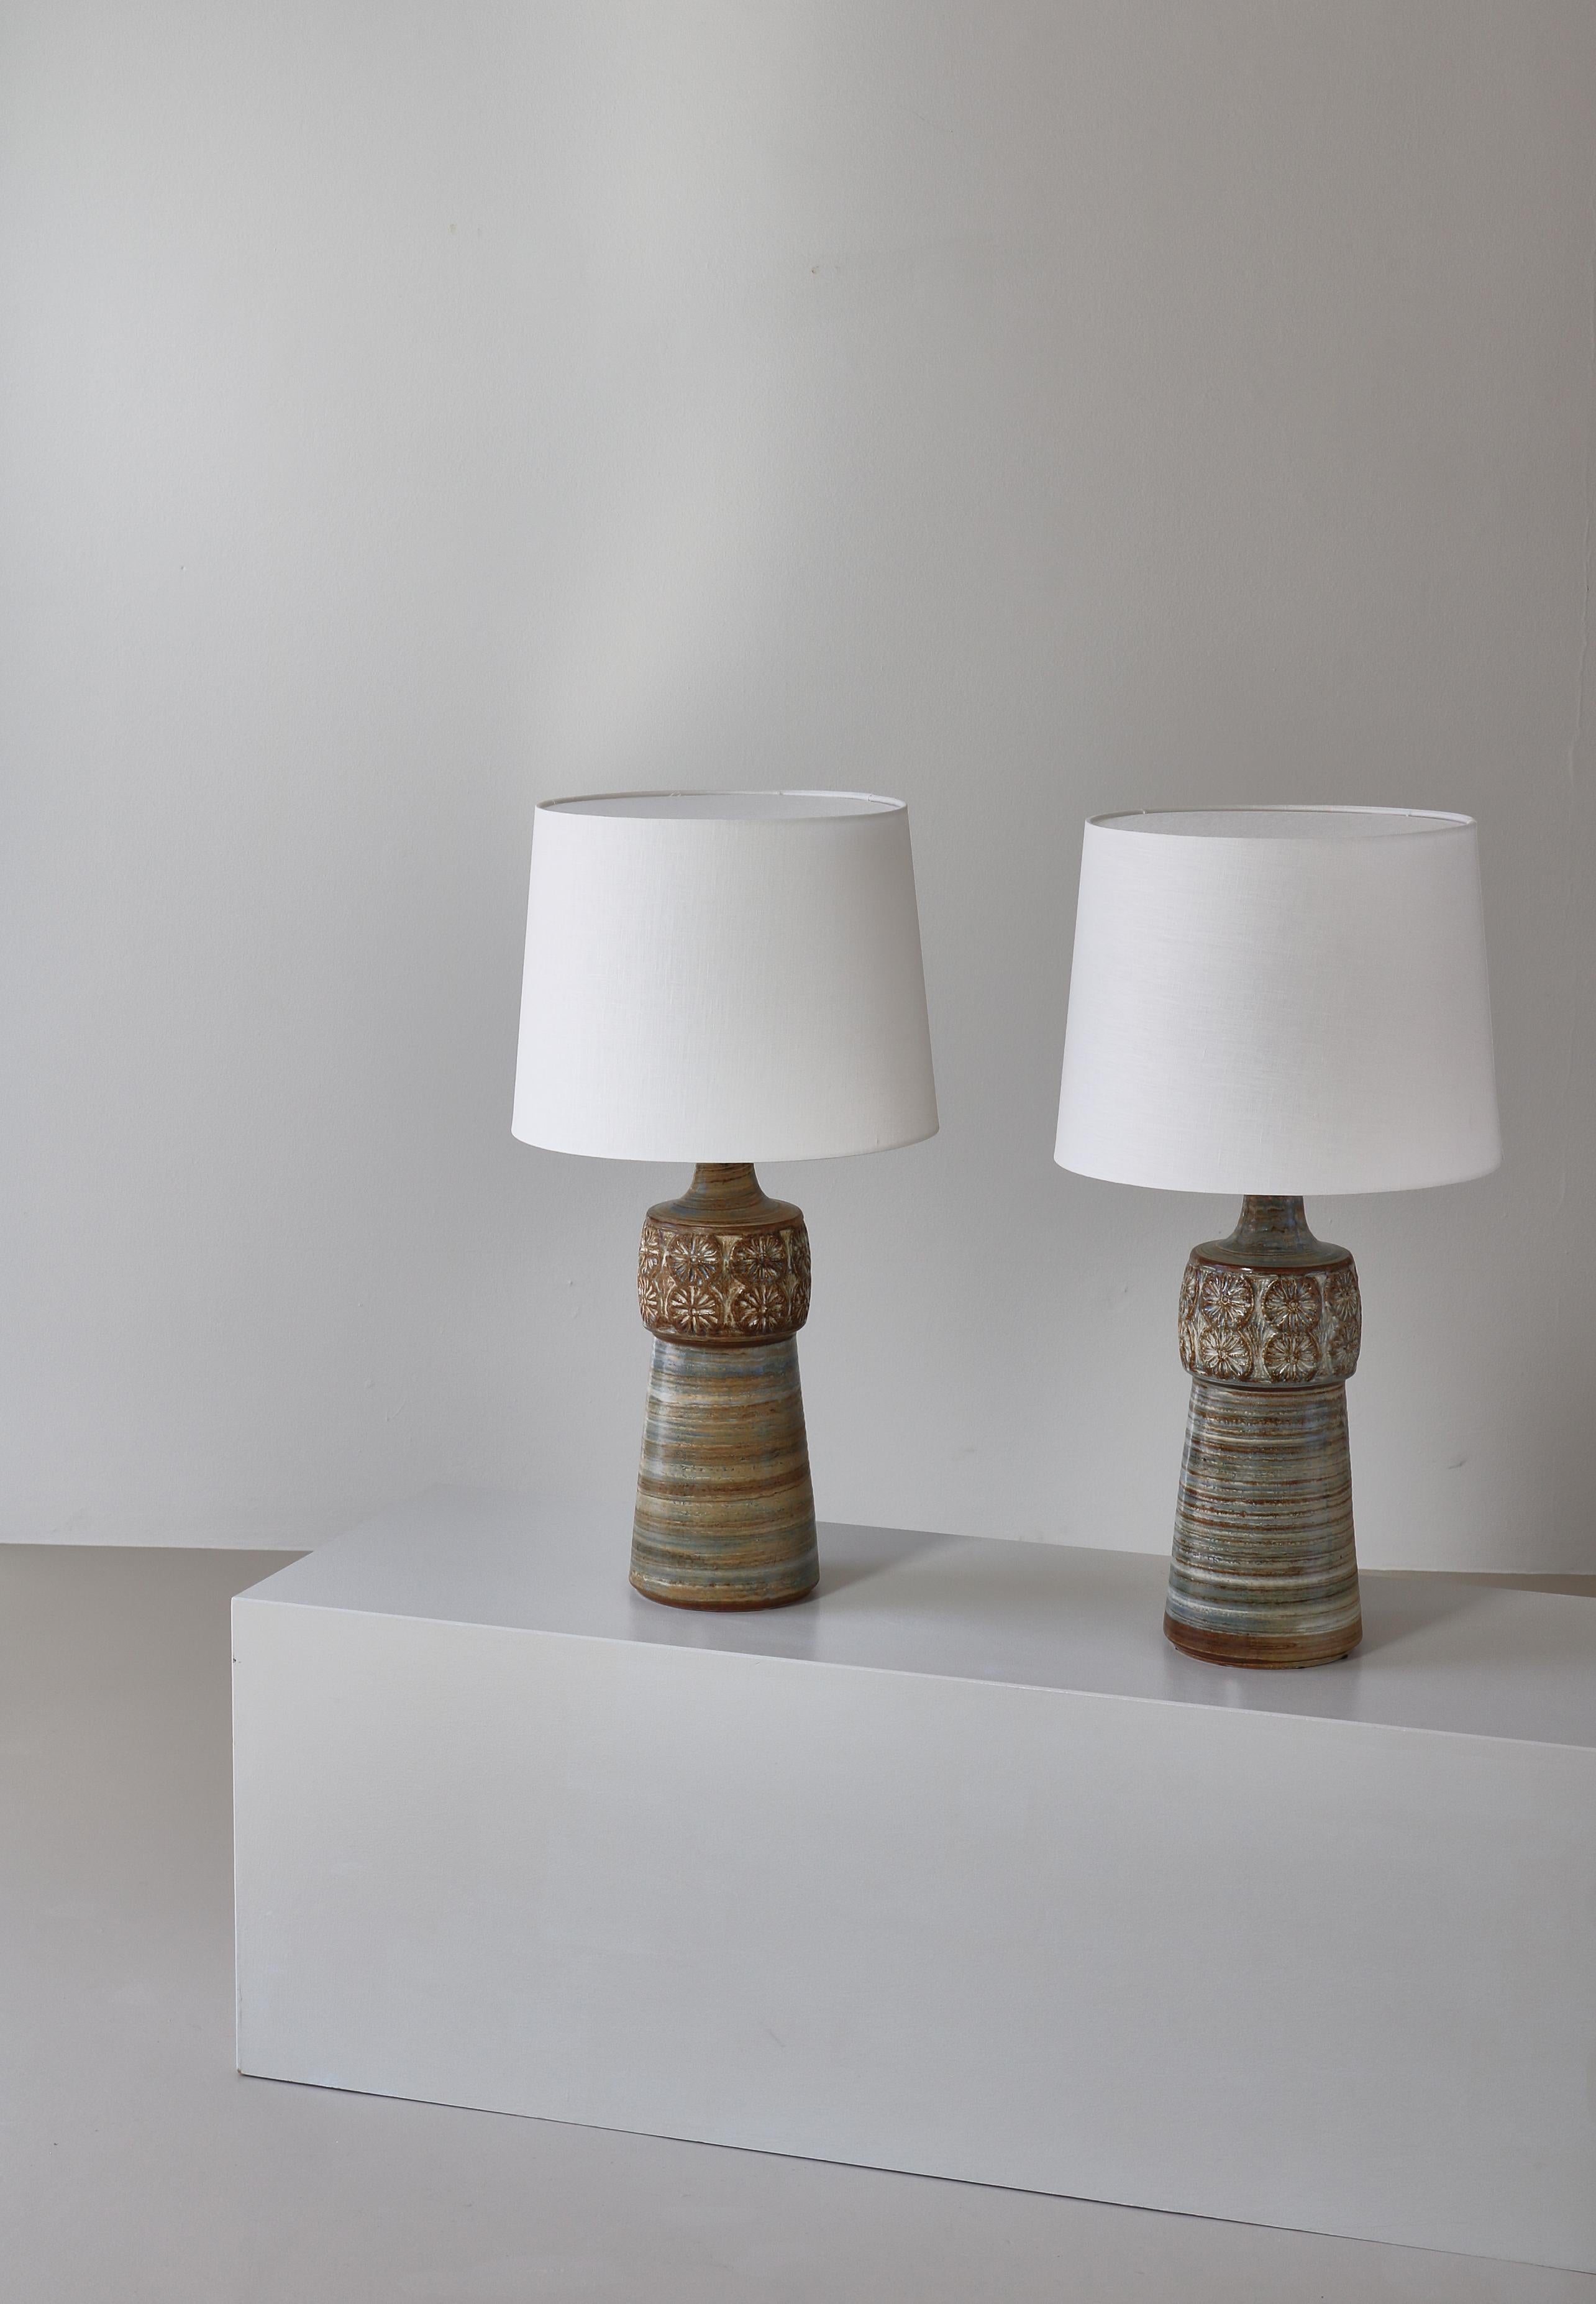 Scandinavian Modern Pair of Unique Danish Modern Stoneware Table Lamps by Søholm, Denmark, 1960s For Sale